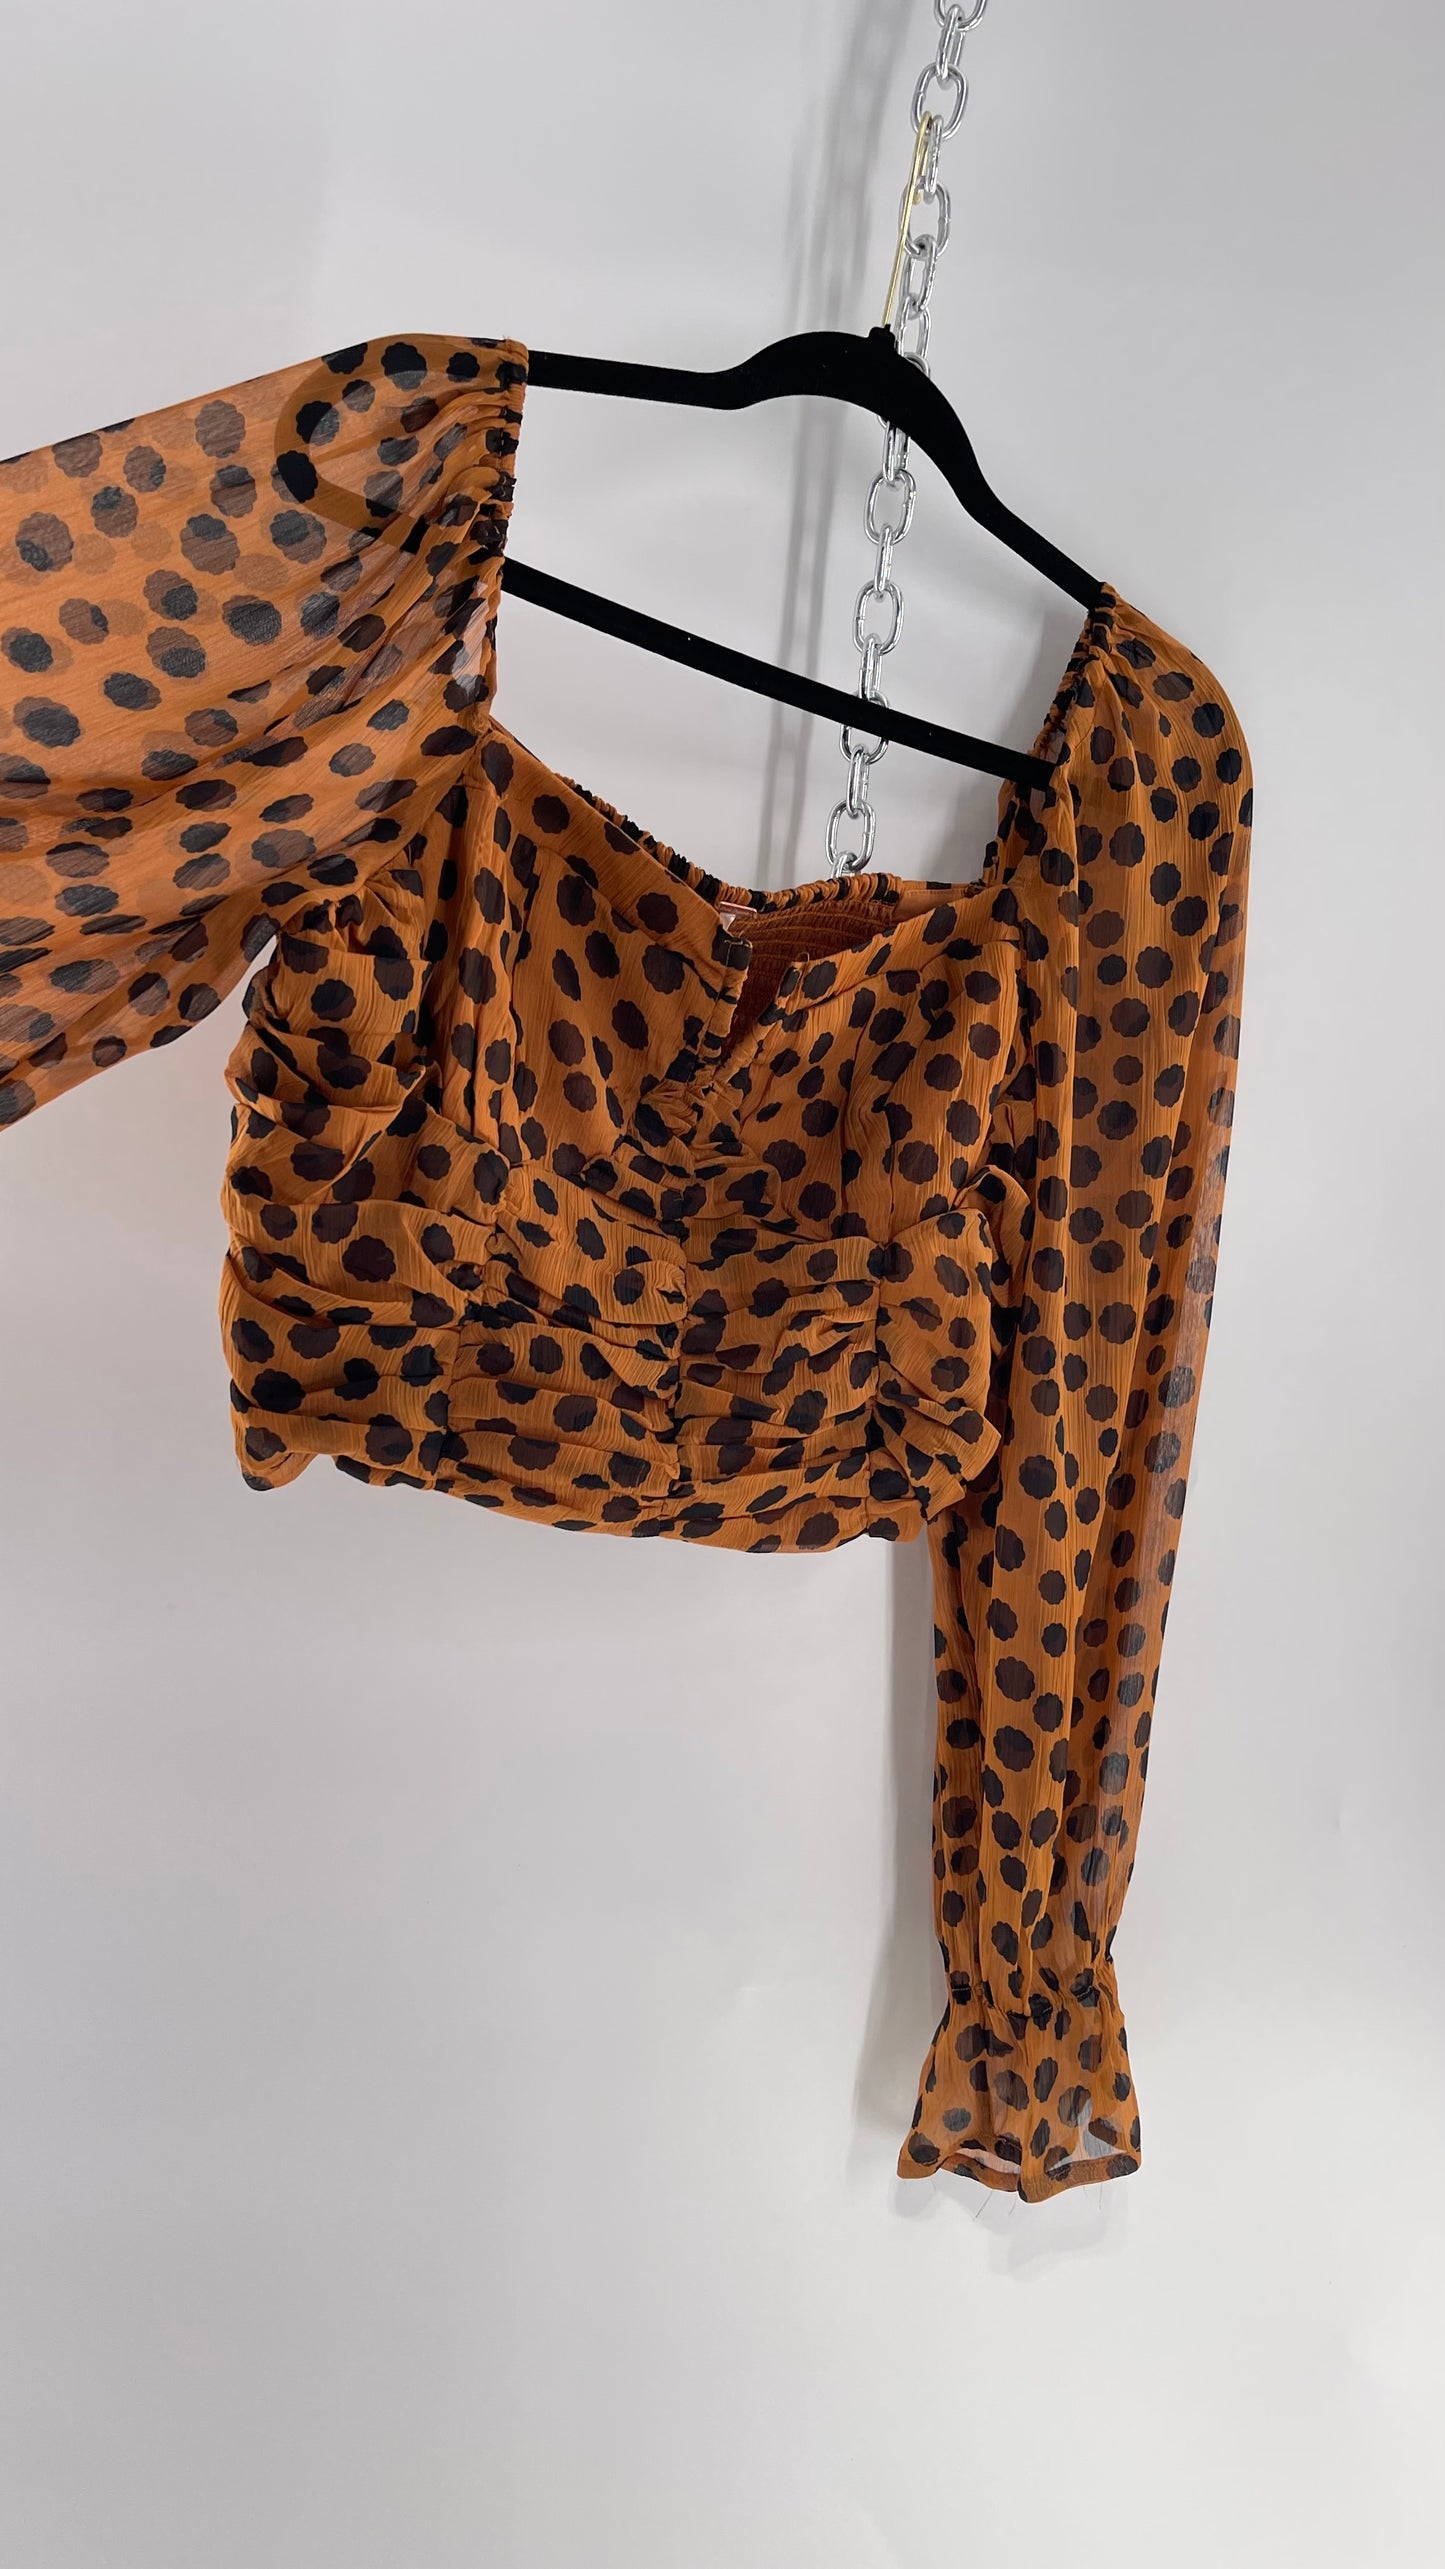 Free People Brown Black Animal Print Blouse with Ruched Bodice and Tags Attached (Large)